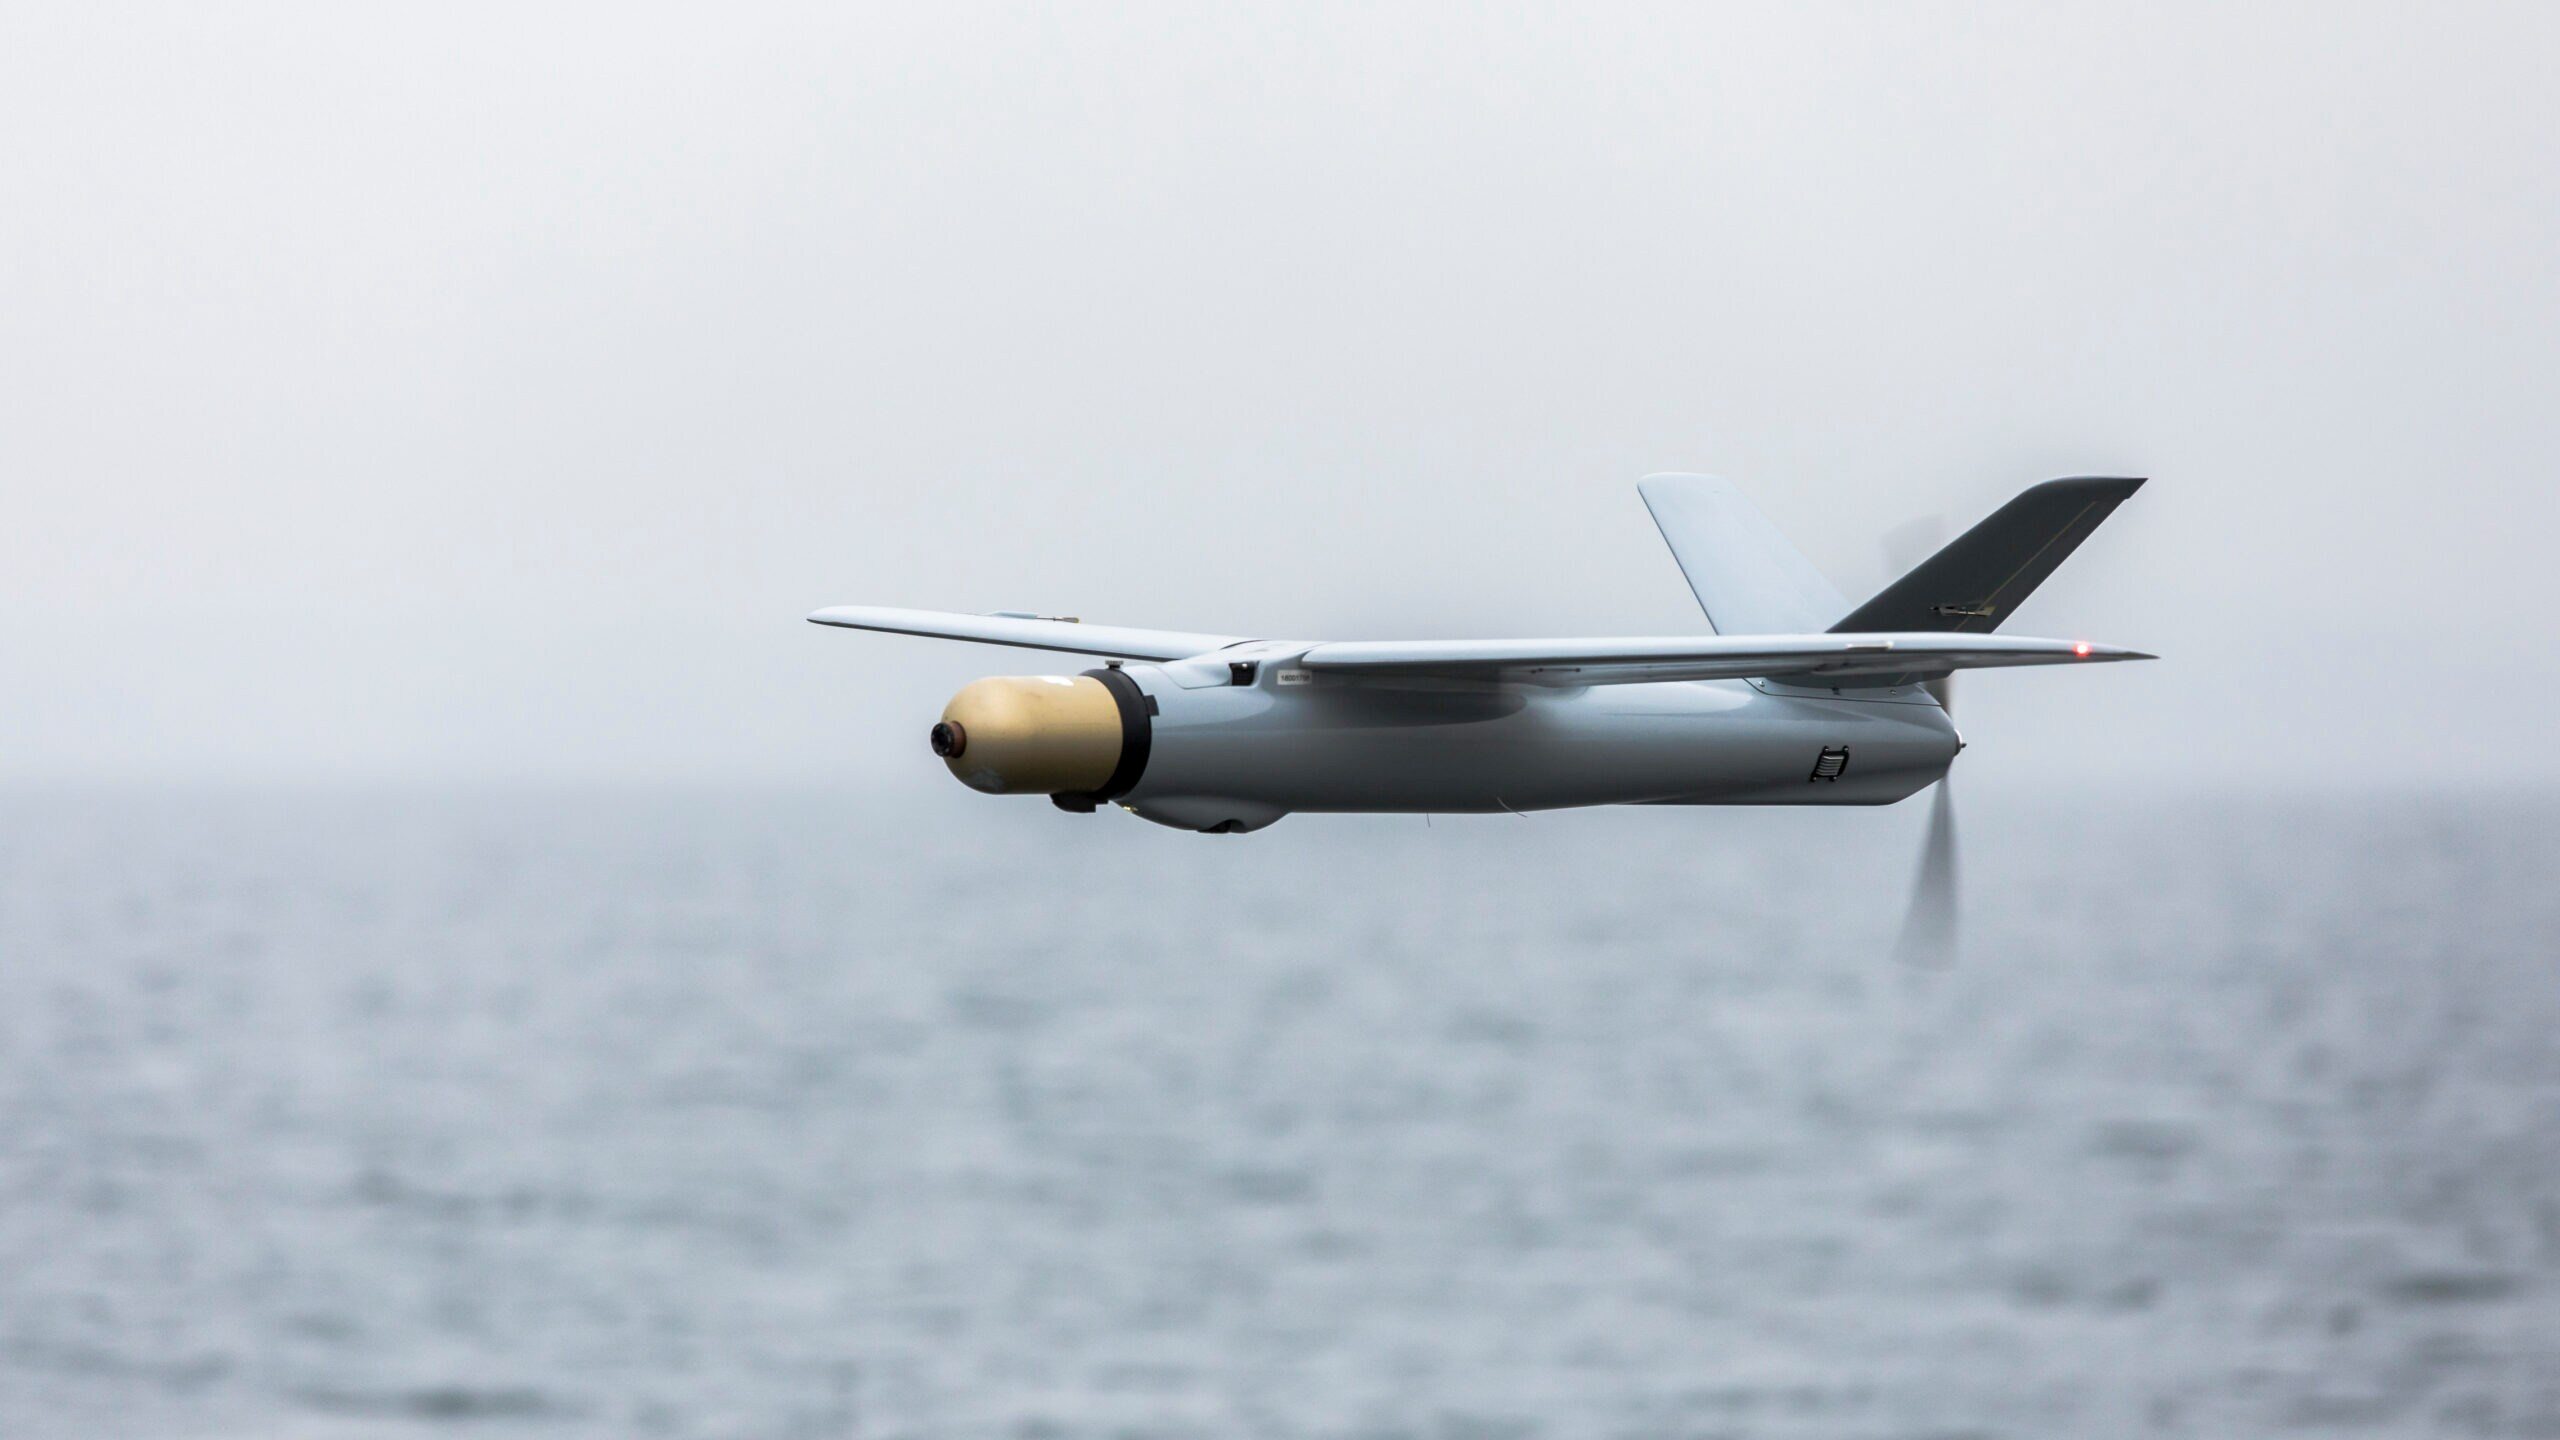 Polish drones are a terror for the Russians.  They just destroyed their anti-aircraft system